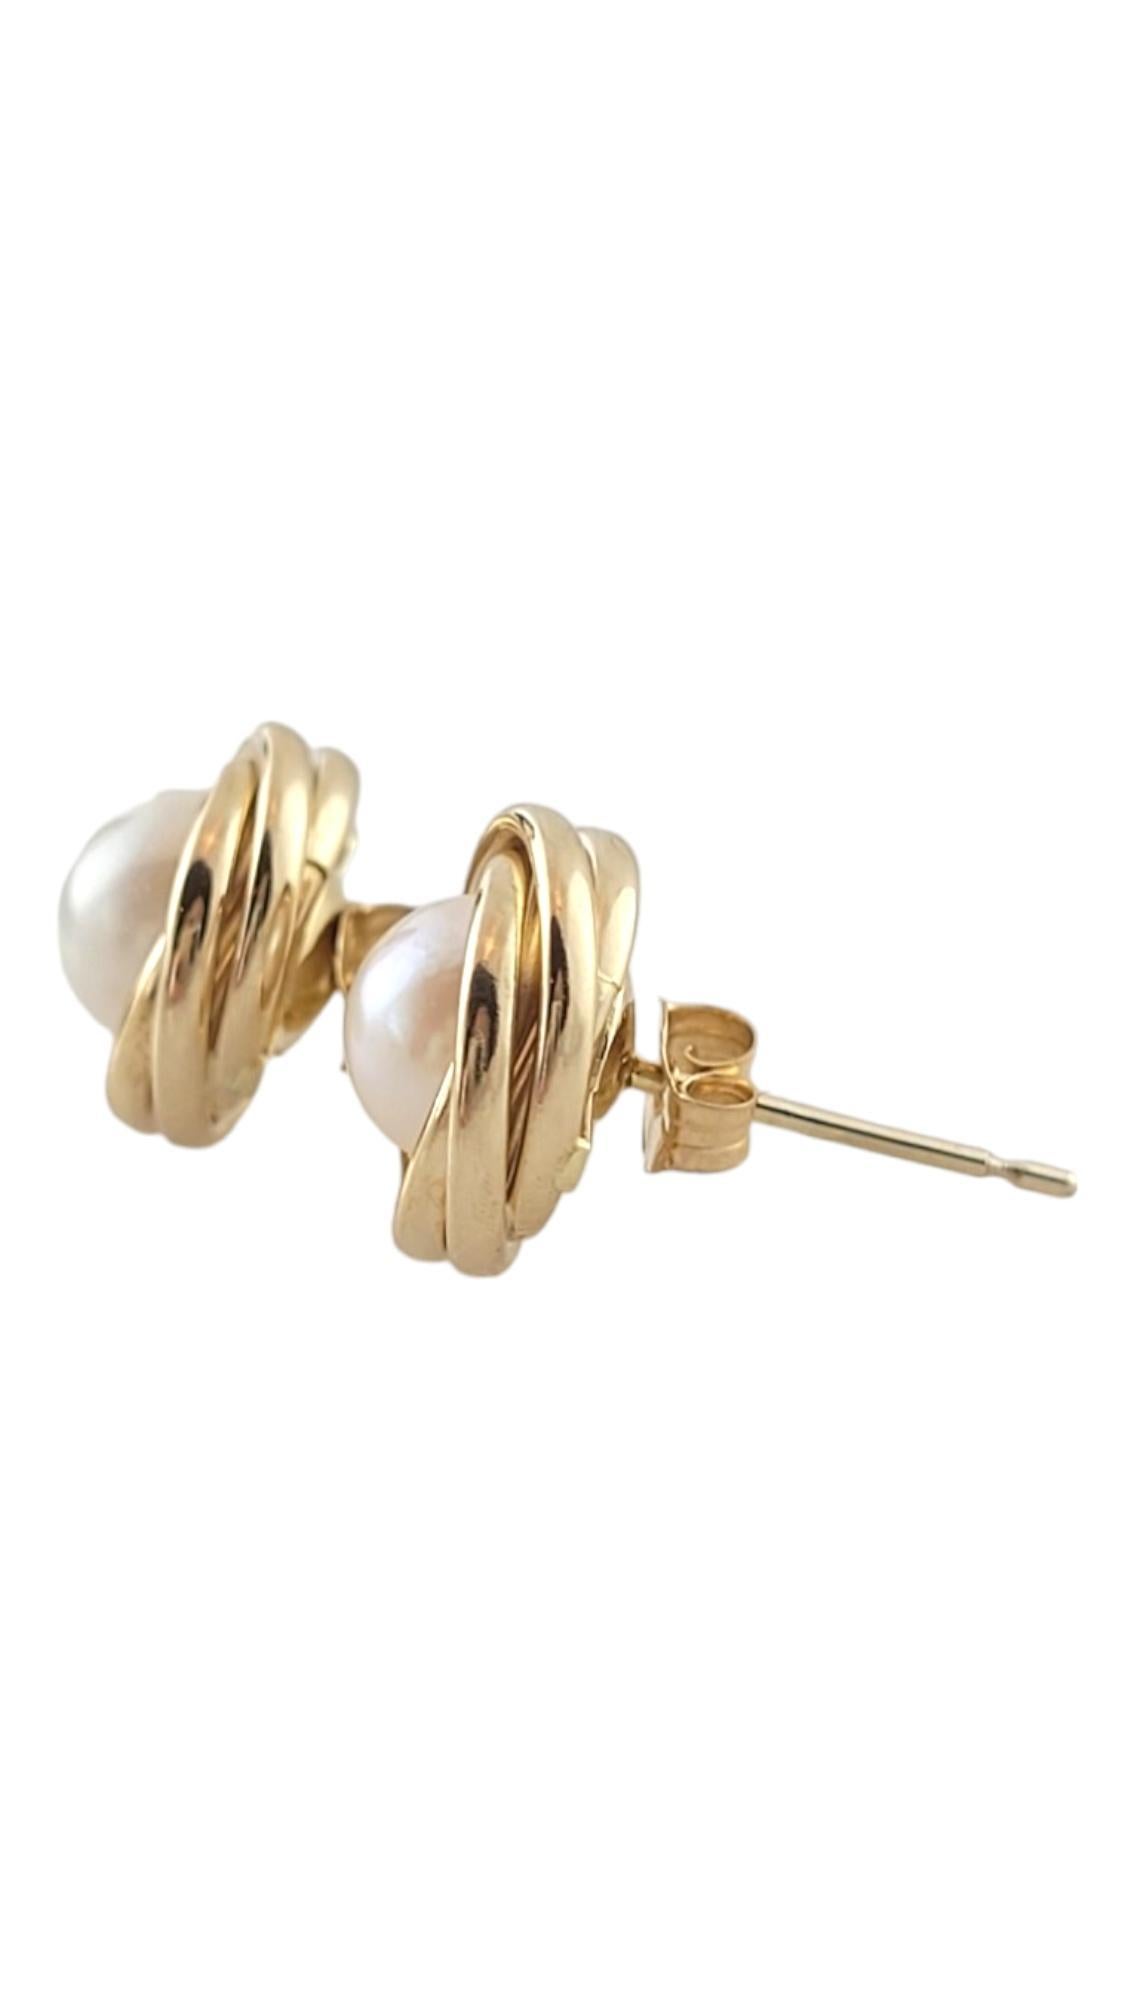 14K Yellow Gold Pearl Earrings

These beautiful earrings feature two gorgeous white pearls set in 14K yellow gold!
(Pearls approximately 7mm each)

Size: 11.4mm X 11.4mm X 7.7mm

Weight: 1.4 dwt/ 2.2 g

Hallmark: 14KT

Very good condition,